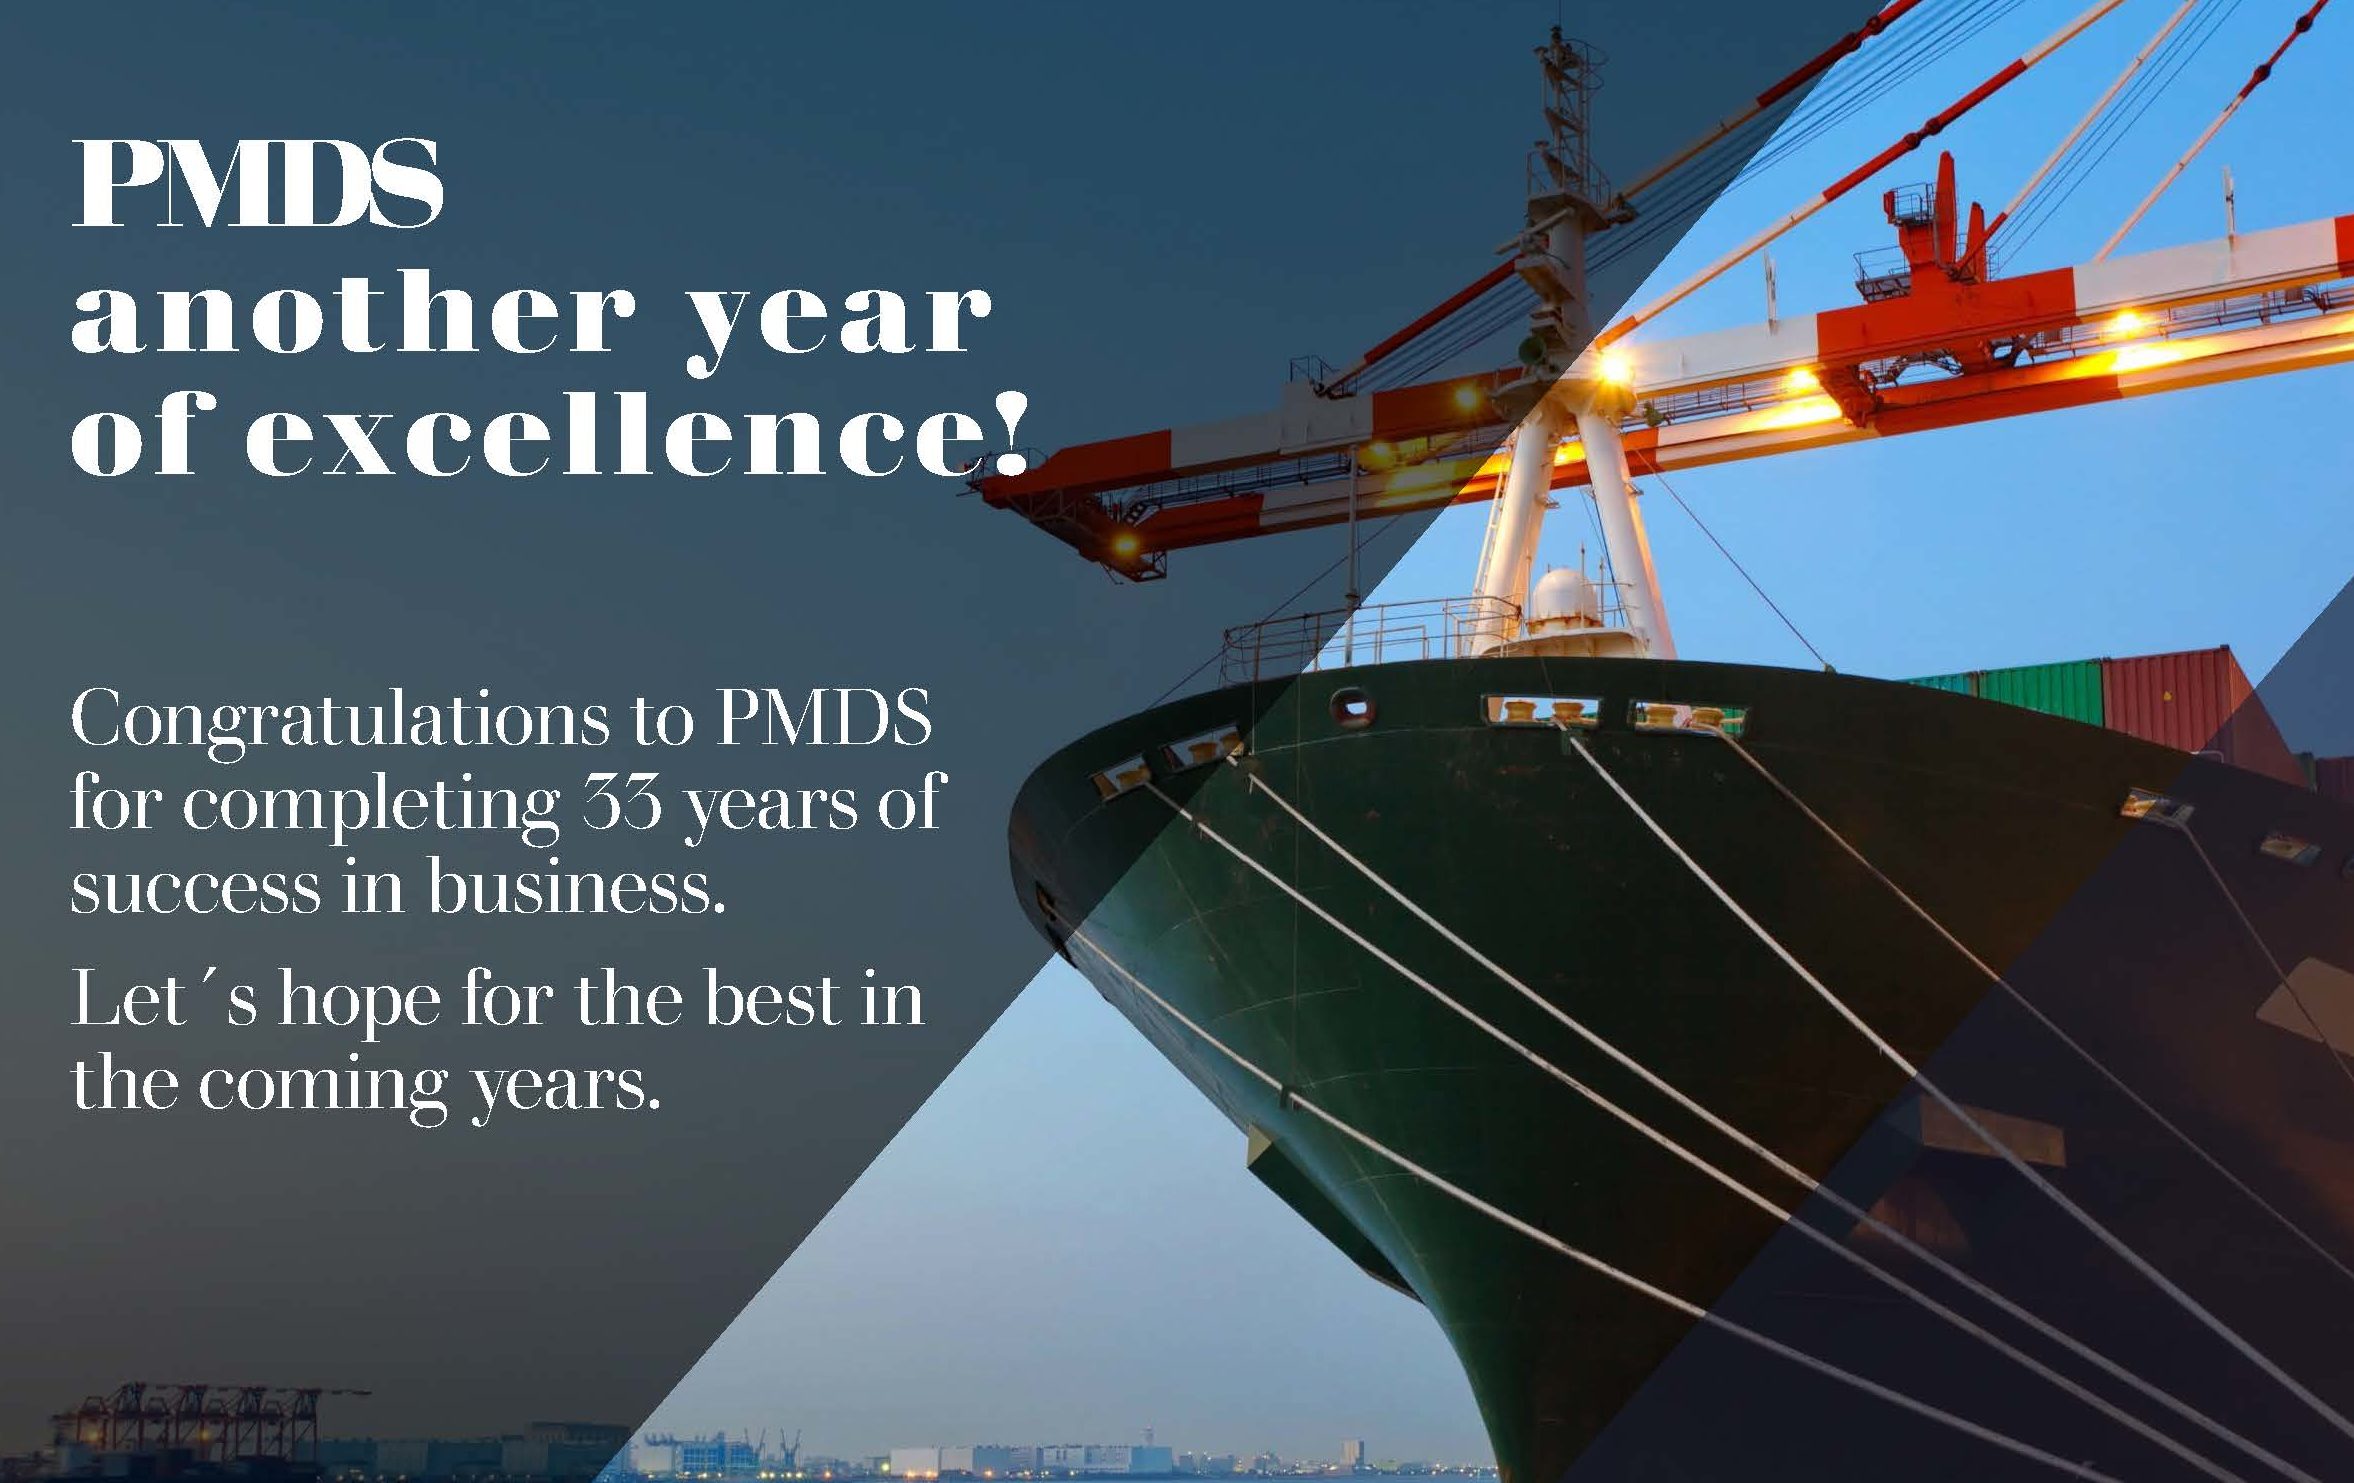 PMDS another year of excellence!